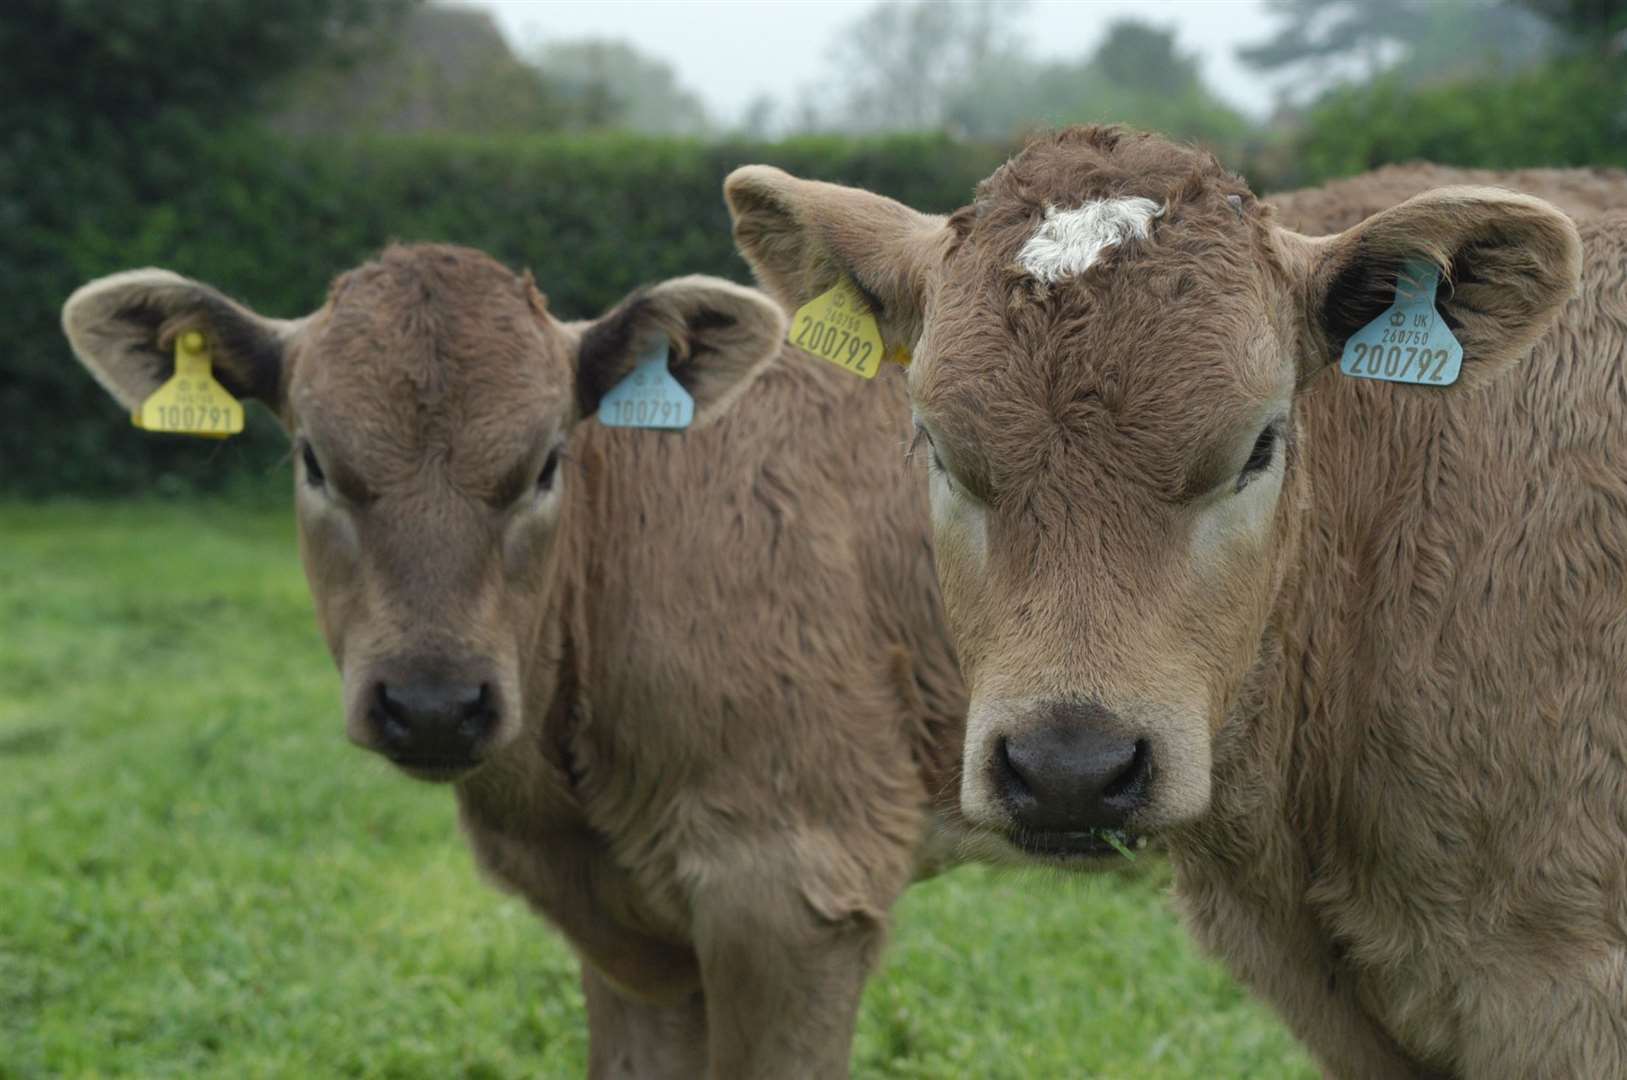 The land was previously used to graze the school's cattle - these two calves were named Thelma and Louise